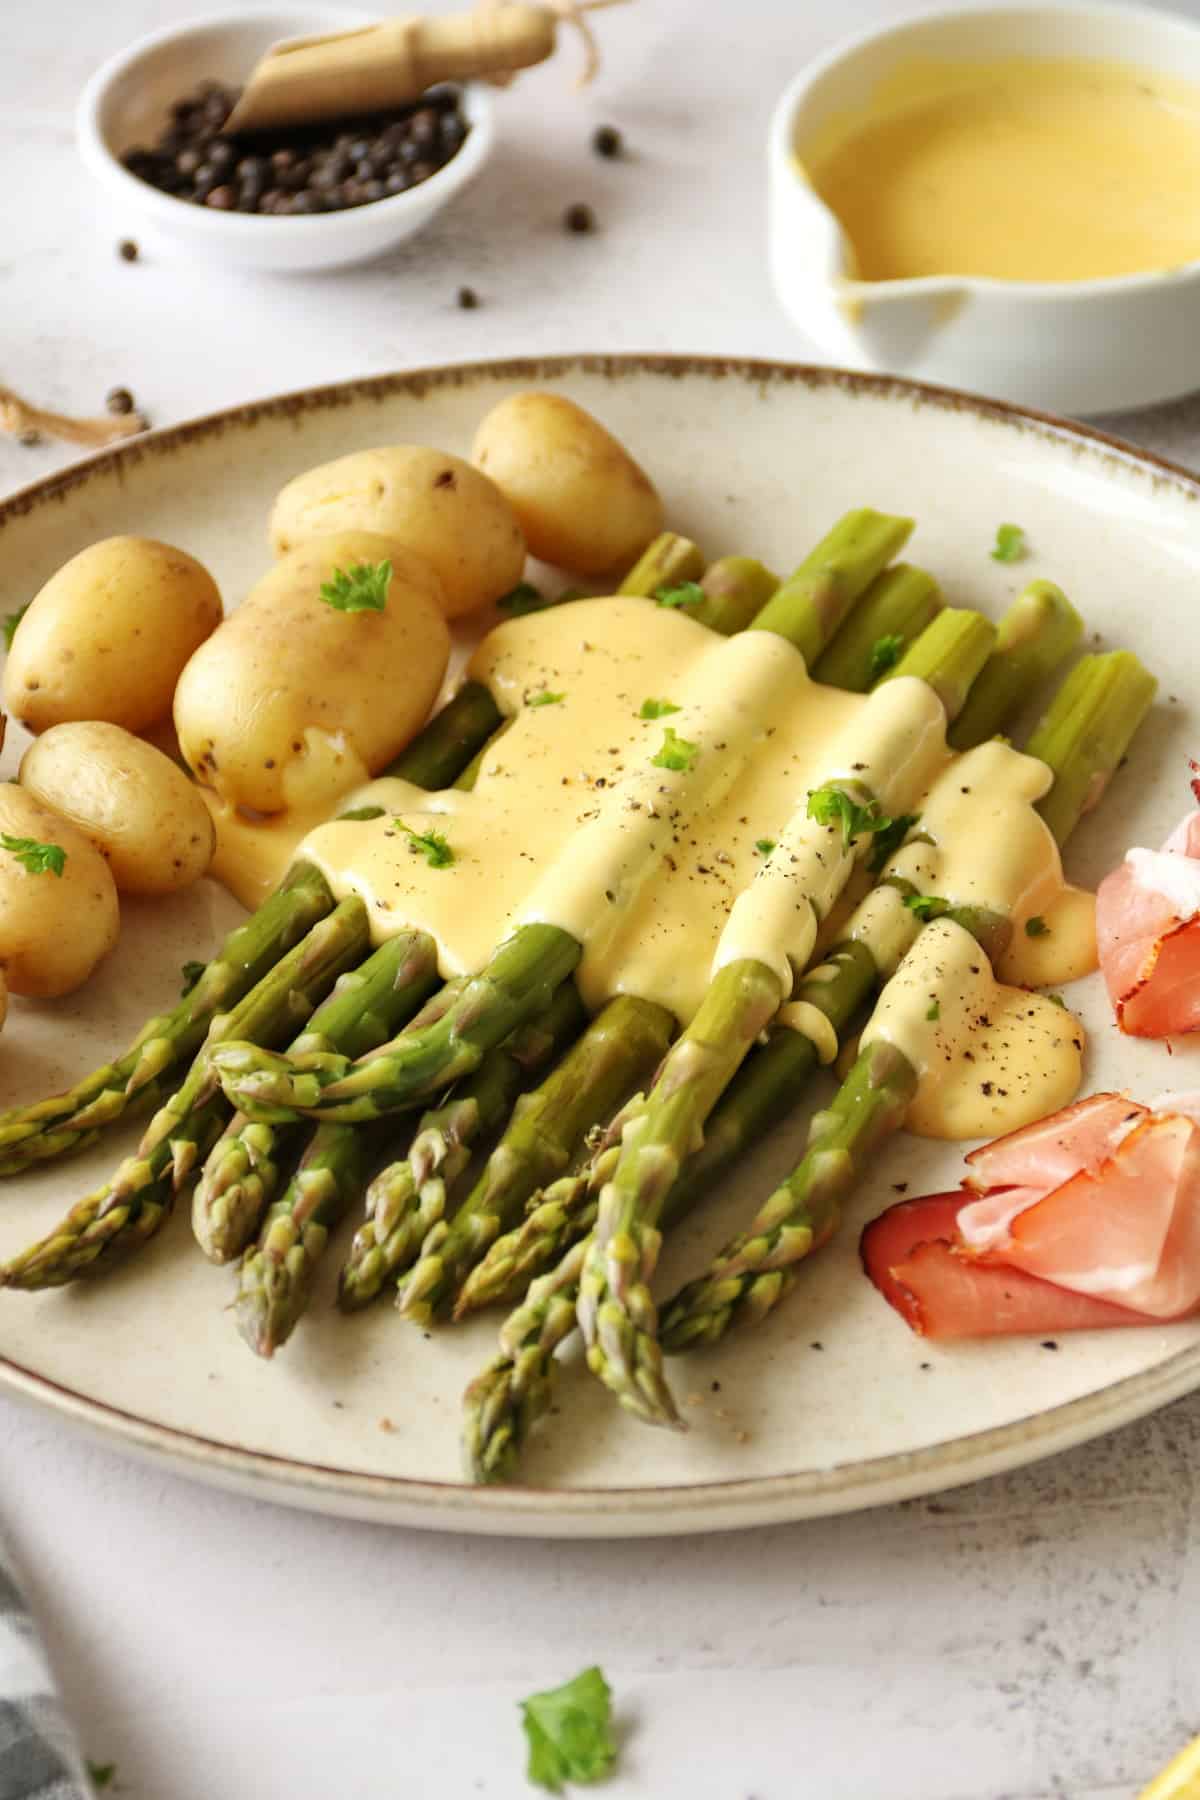 A close-up of a plate of green asparagus with hollandaise sauce, potatoes and ham.